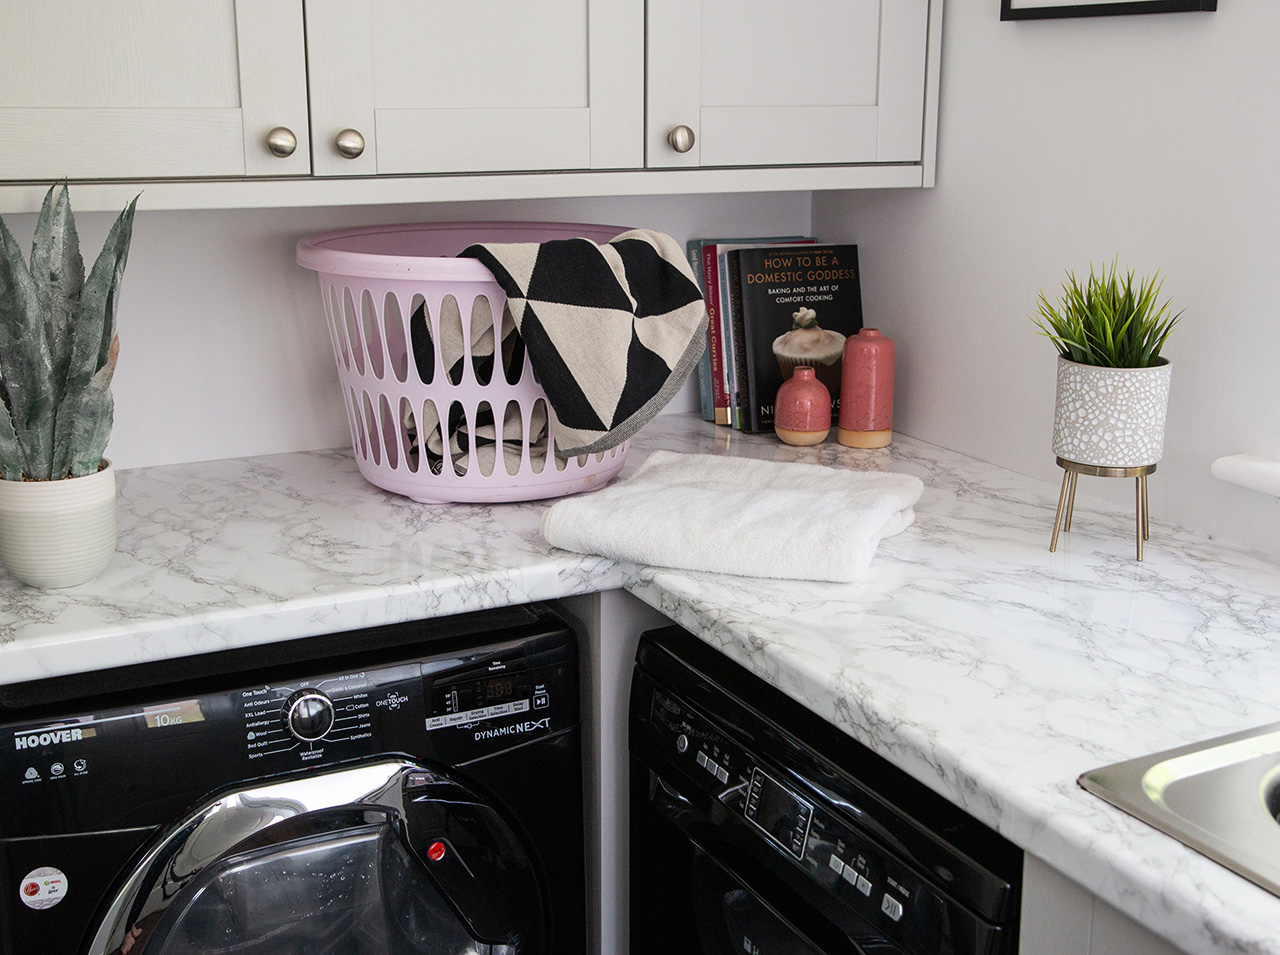 Utility room worktop in a marble look with d-c-fix® Marmi grey adhesive foil.